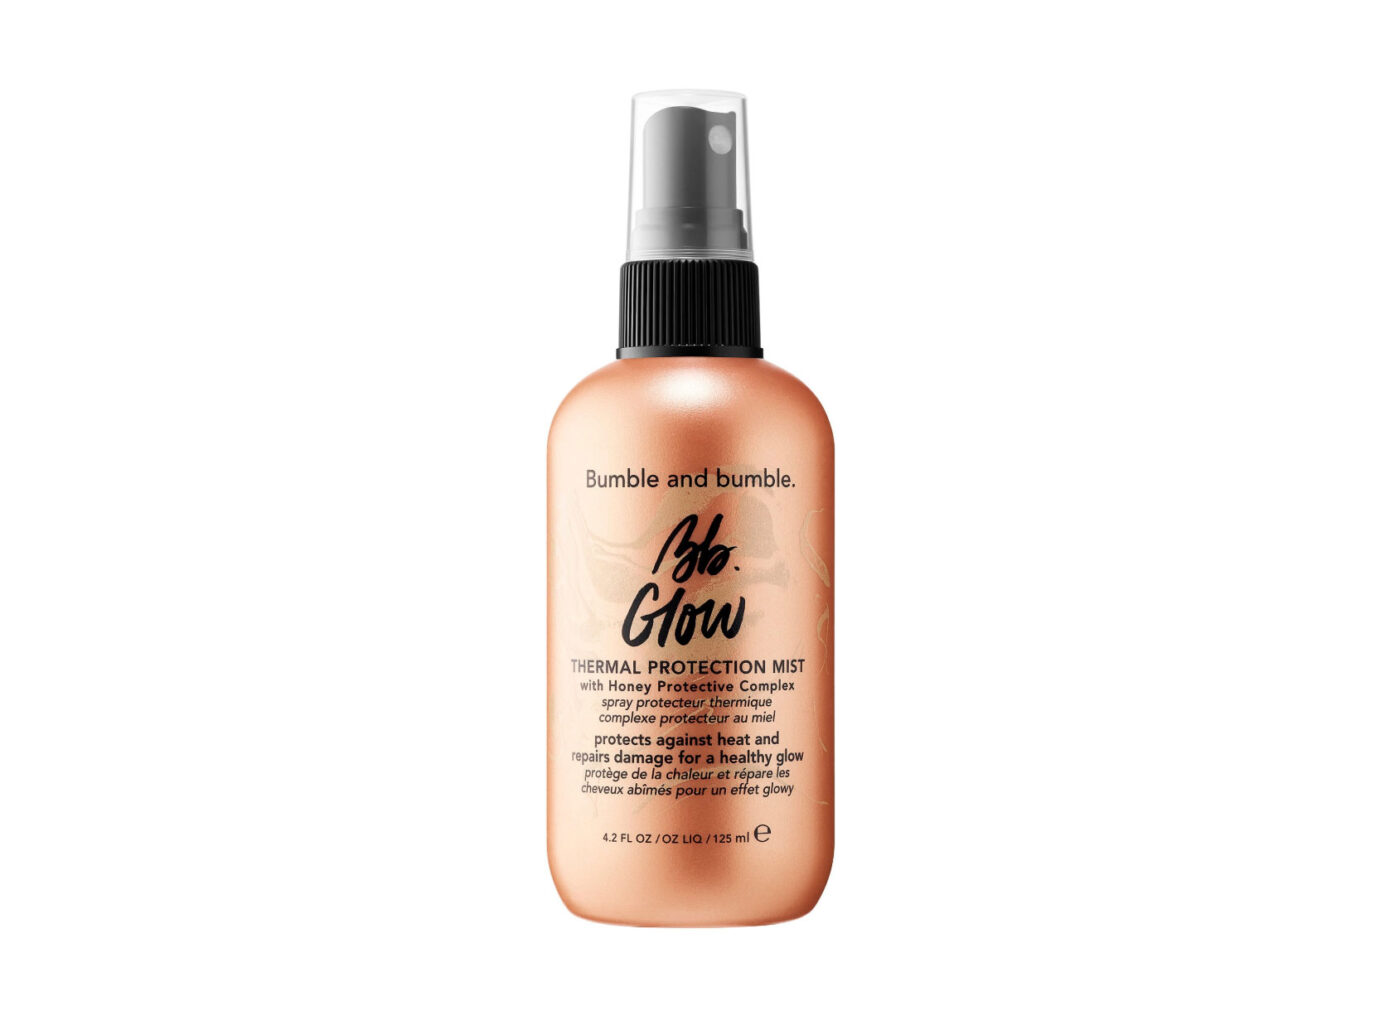 Bumble and Bumble Bb. Glow Thermal Protection Mist